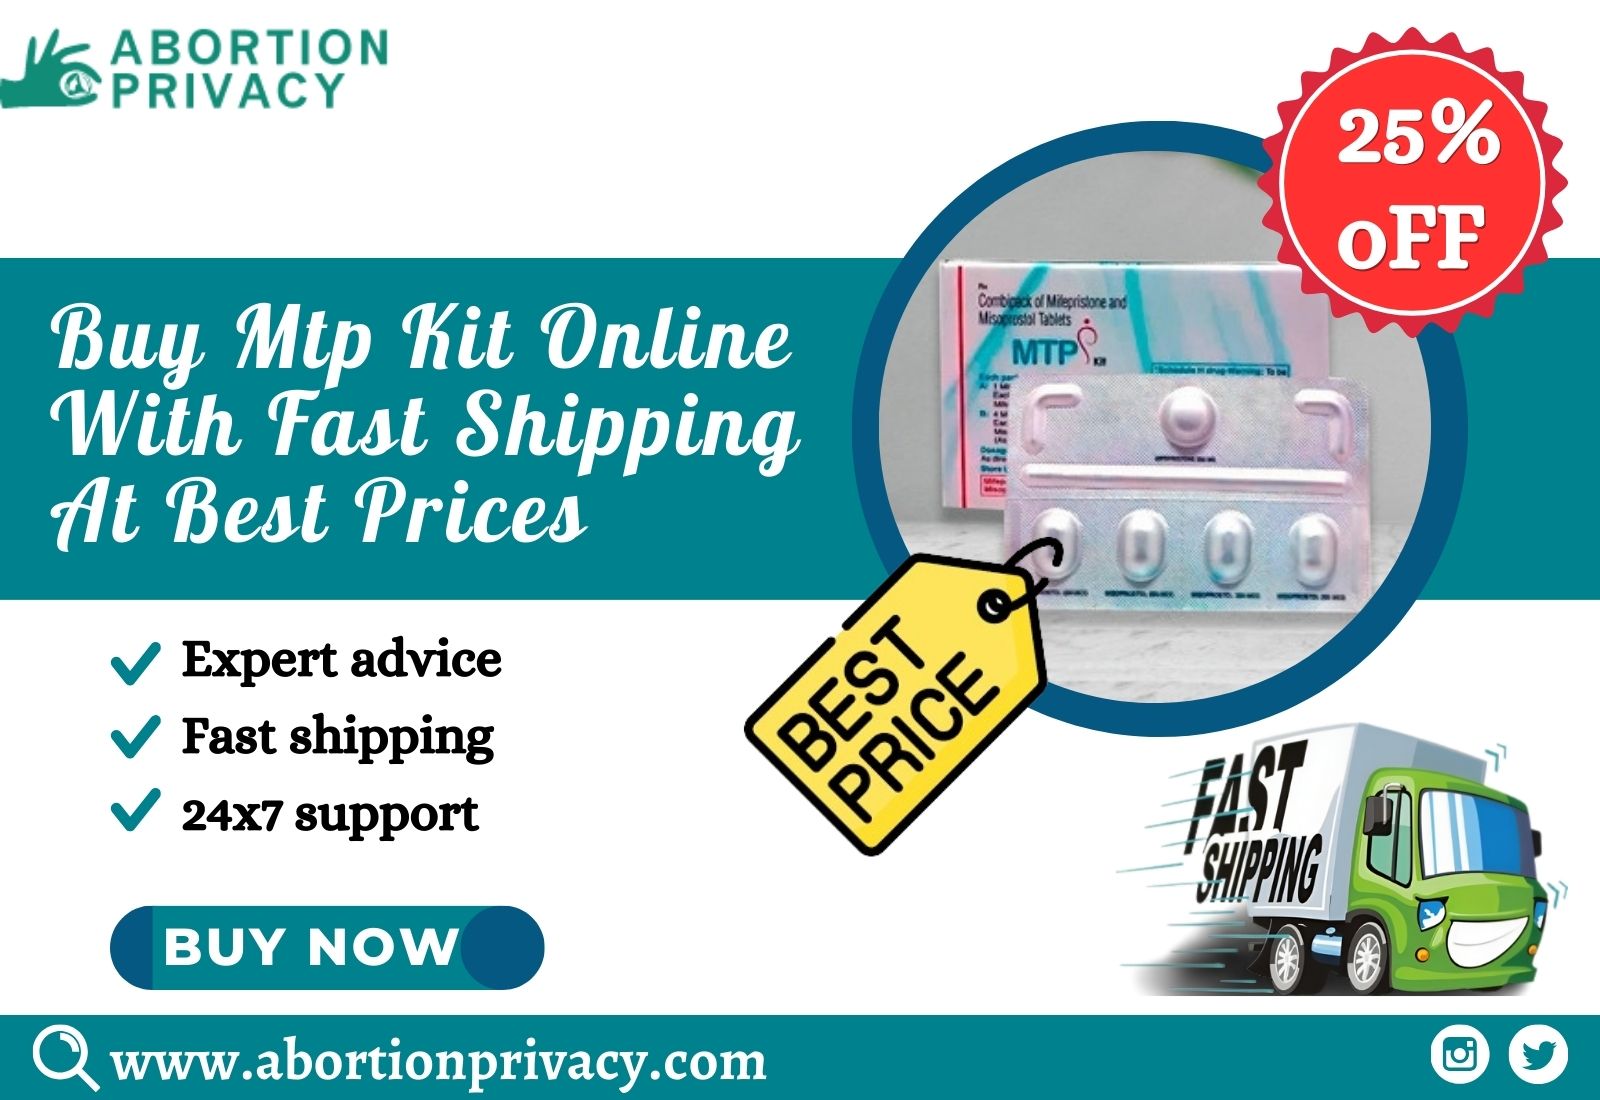 Buy Mtp Kit Online With Fast Shipping At Best Prices - Texas - Syracuse   ID1550053